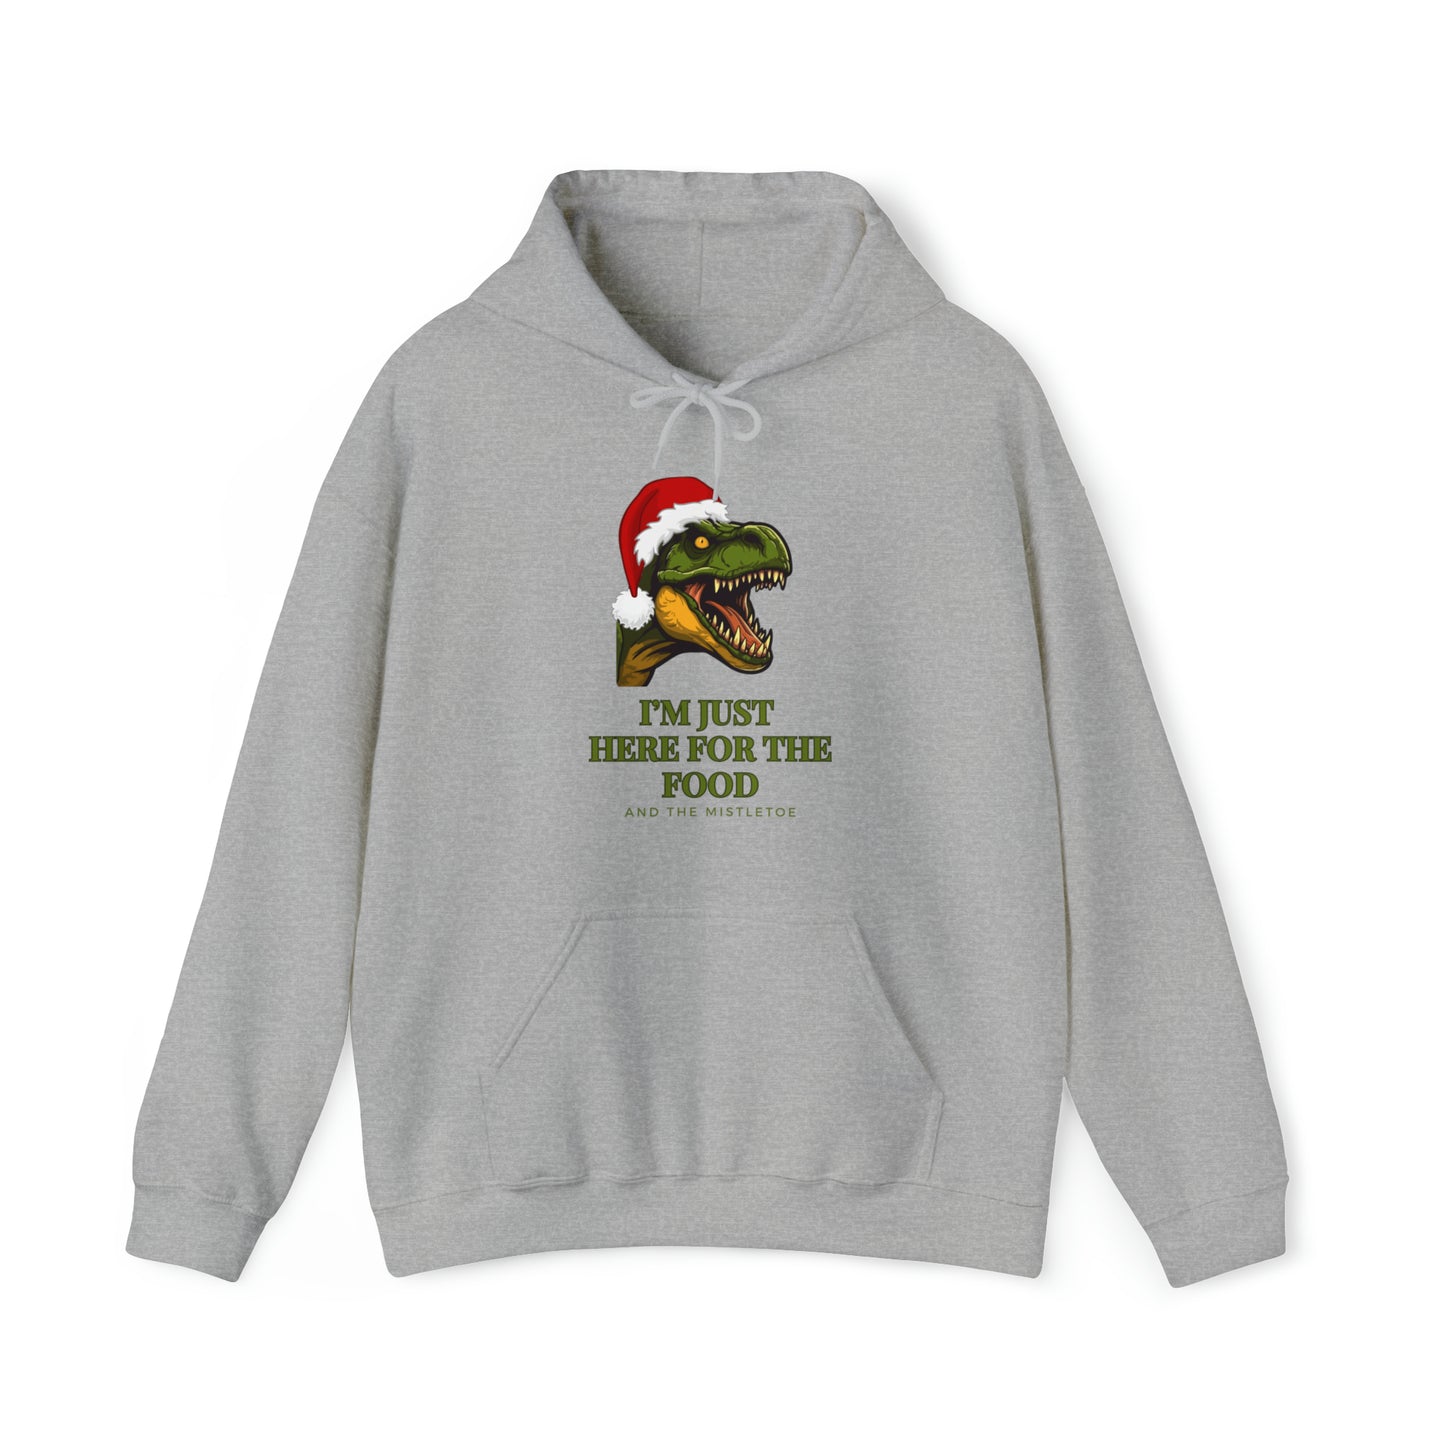 I'm Just Here For The Food And Mistletoe Unisex Heavy Blend™ Hooded Sweatshirt